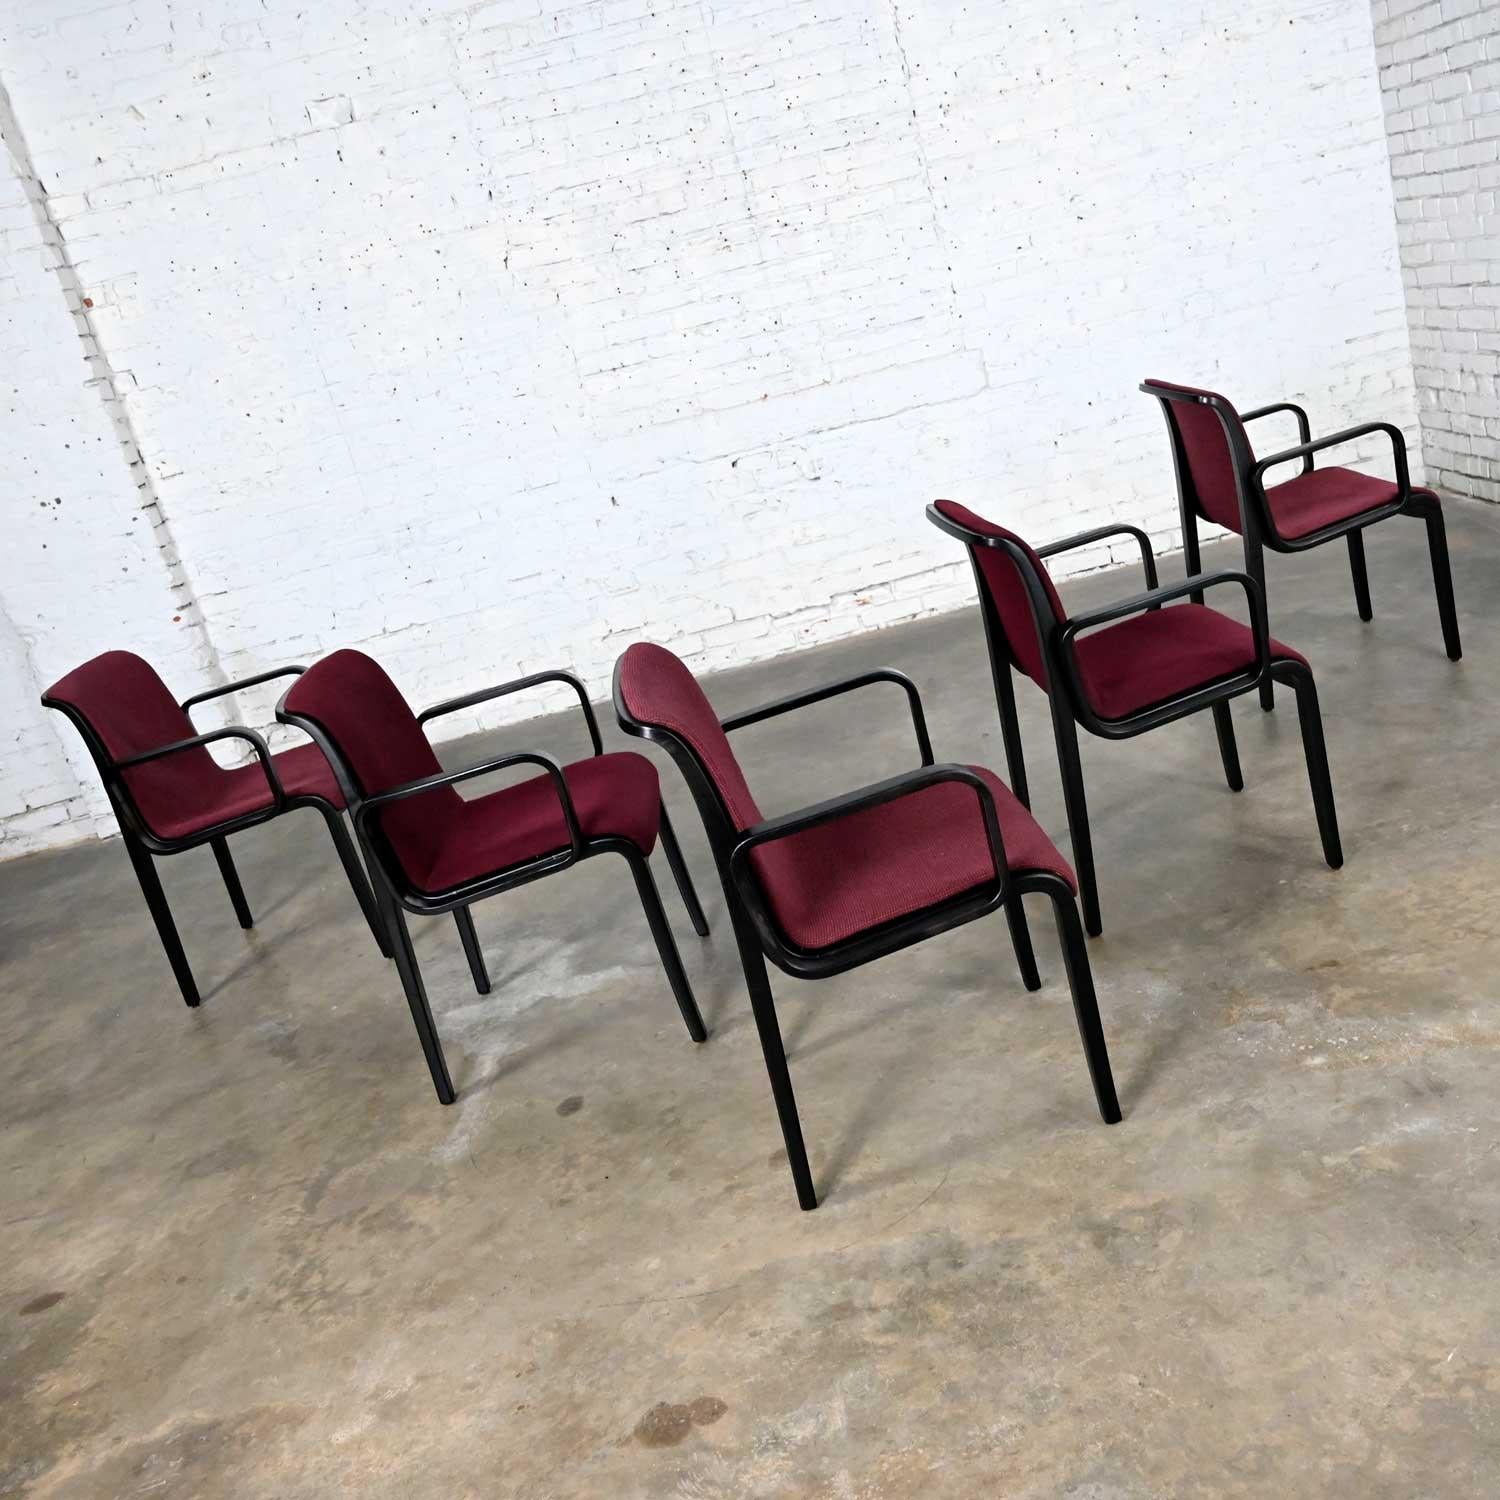 5 Knoll MCM Bentwood 1300 Series Dining Chairs Maroon & Black by Bill Stephens For Sale 1